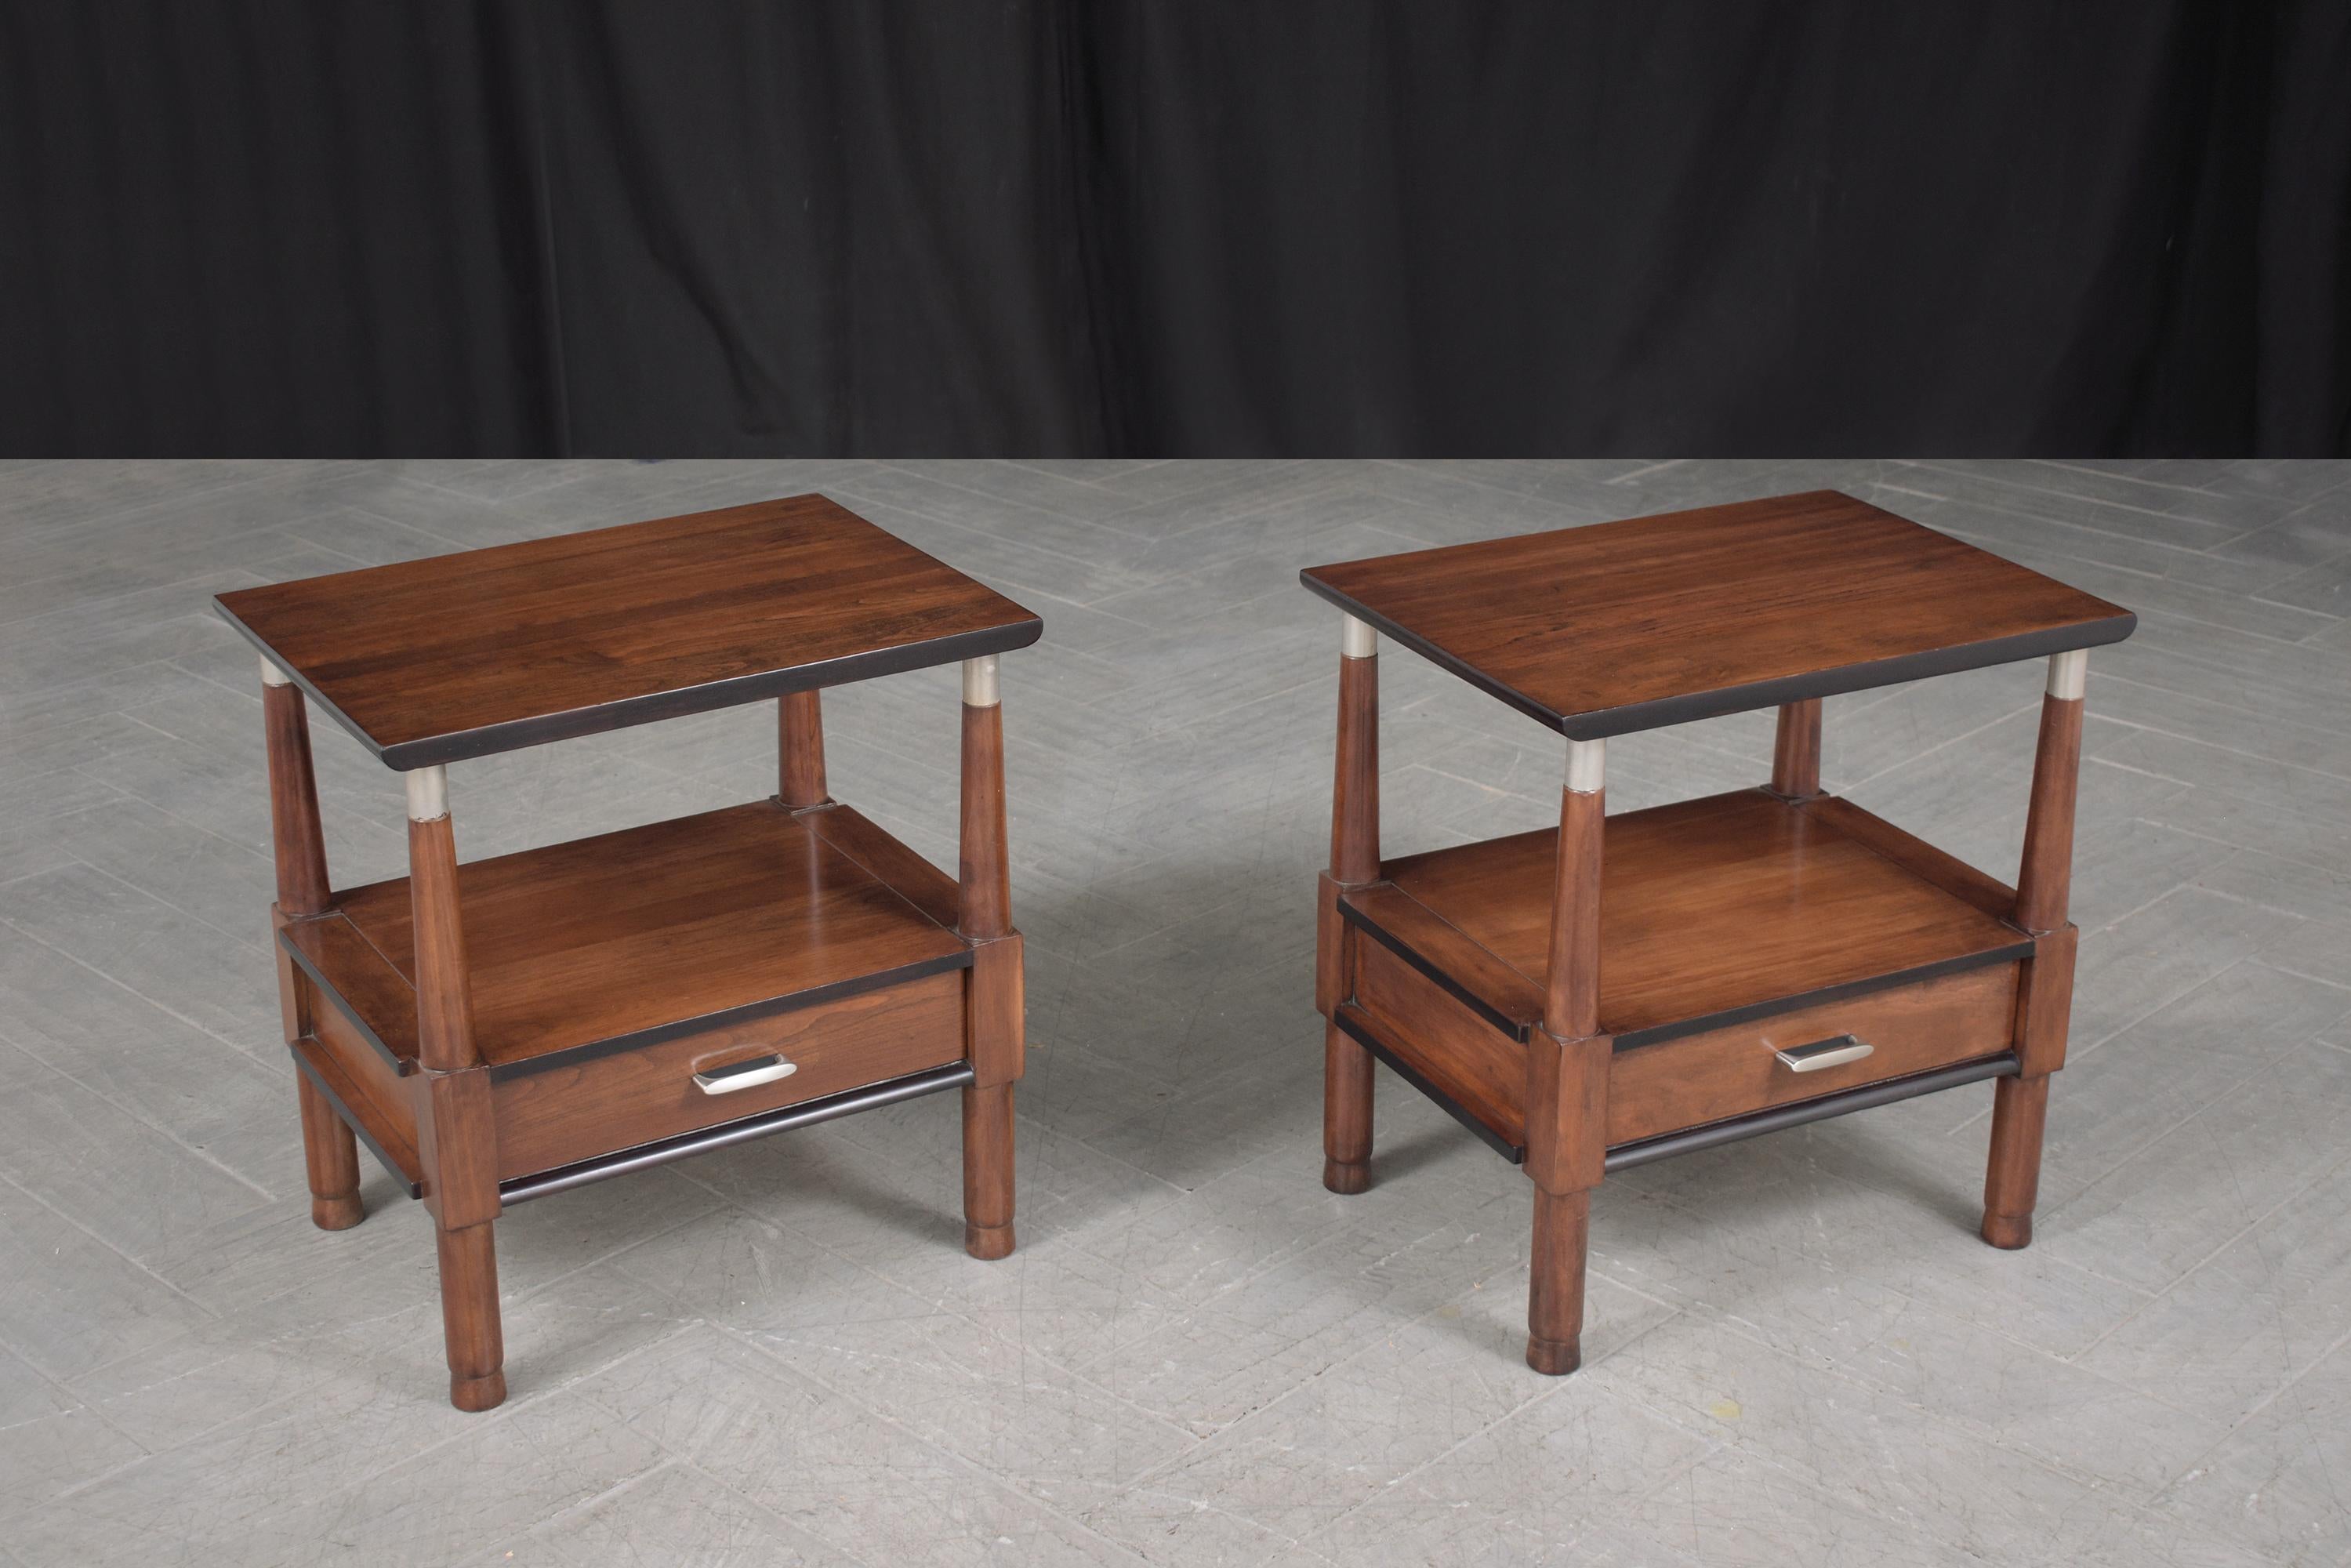 Mid-20th Century Refined Mid-Century Modern Nightstands: A Blend of Elegance and Functionality